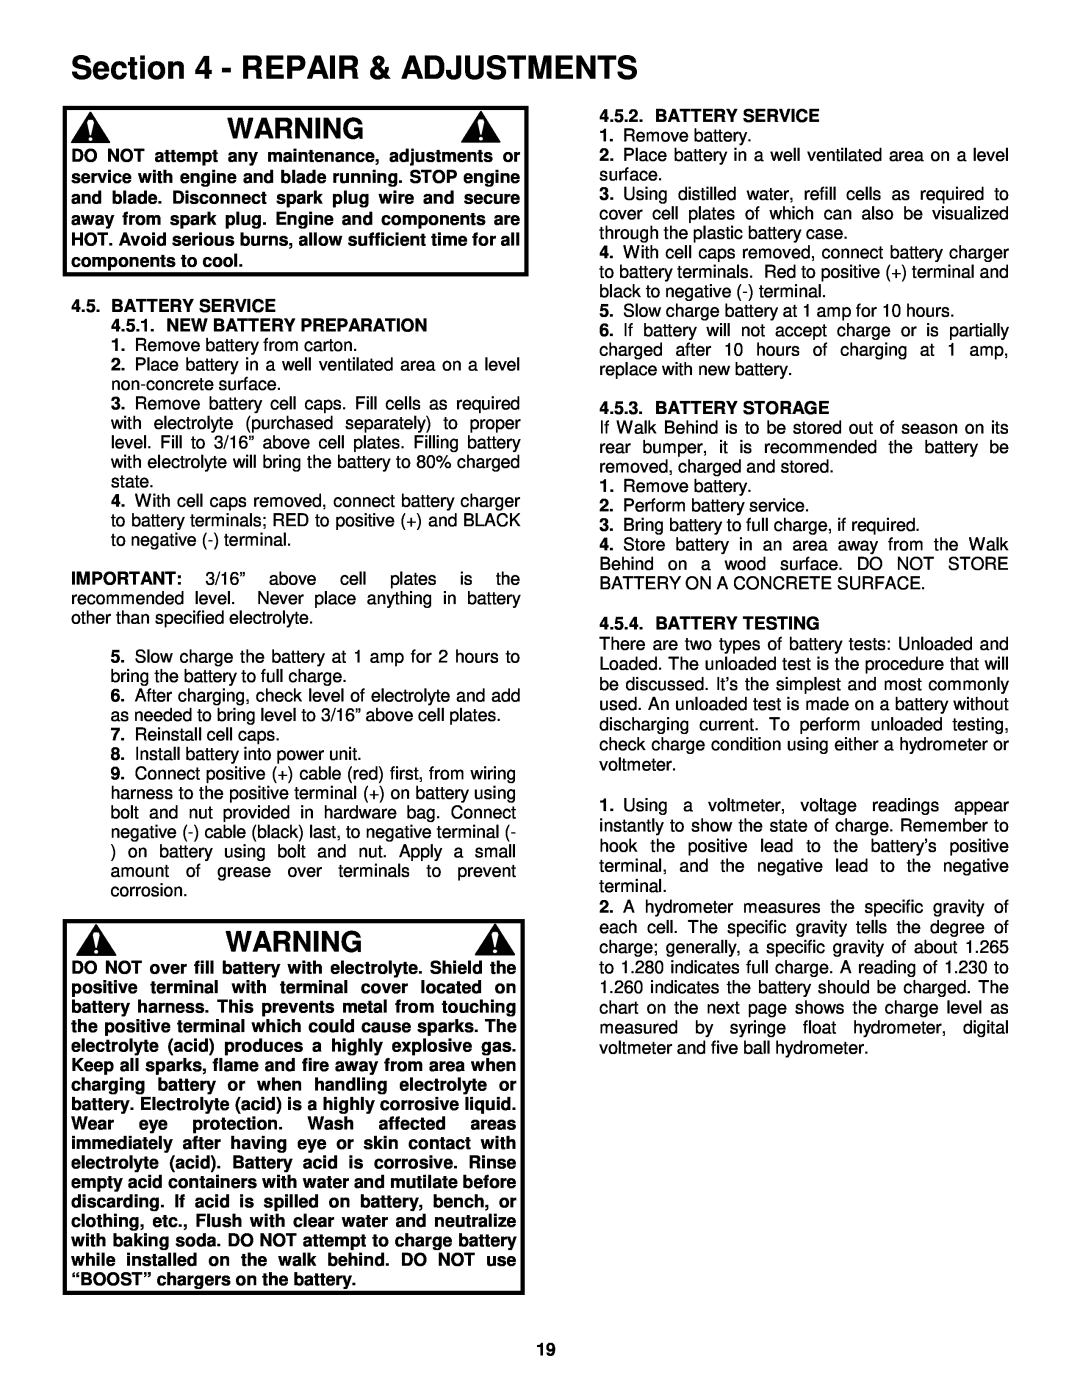 Snapper P216012E important safety instructions Repair & Adjustments, Battery Service 